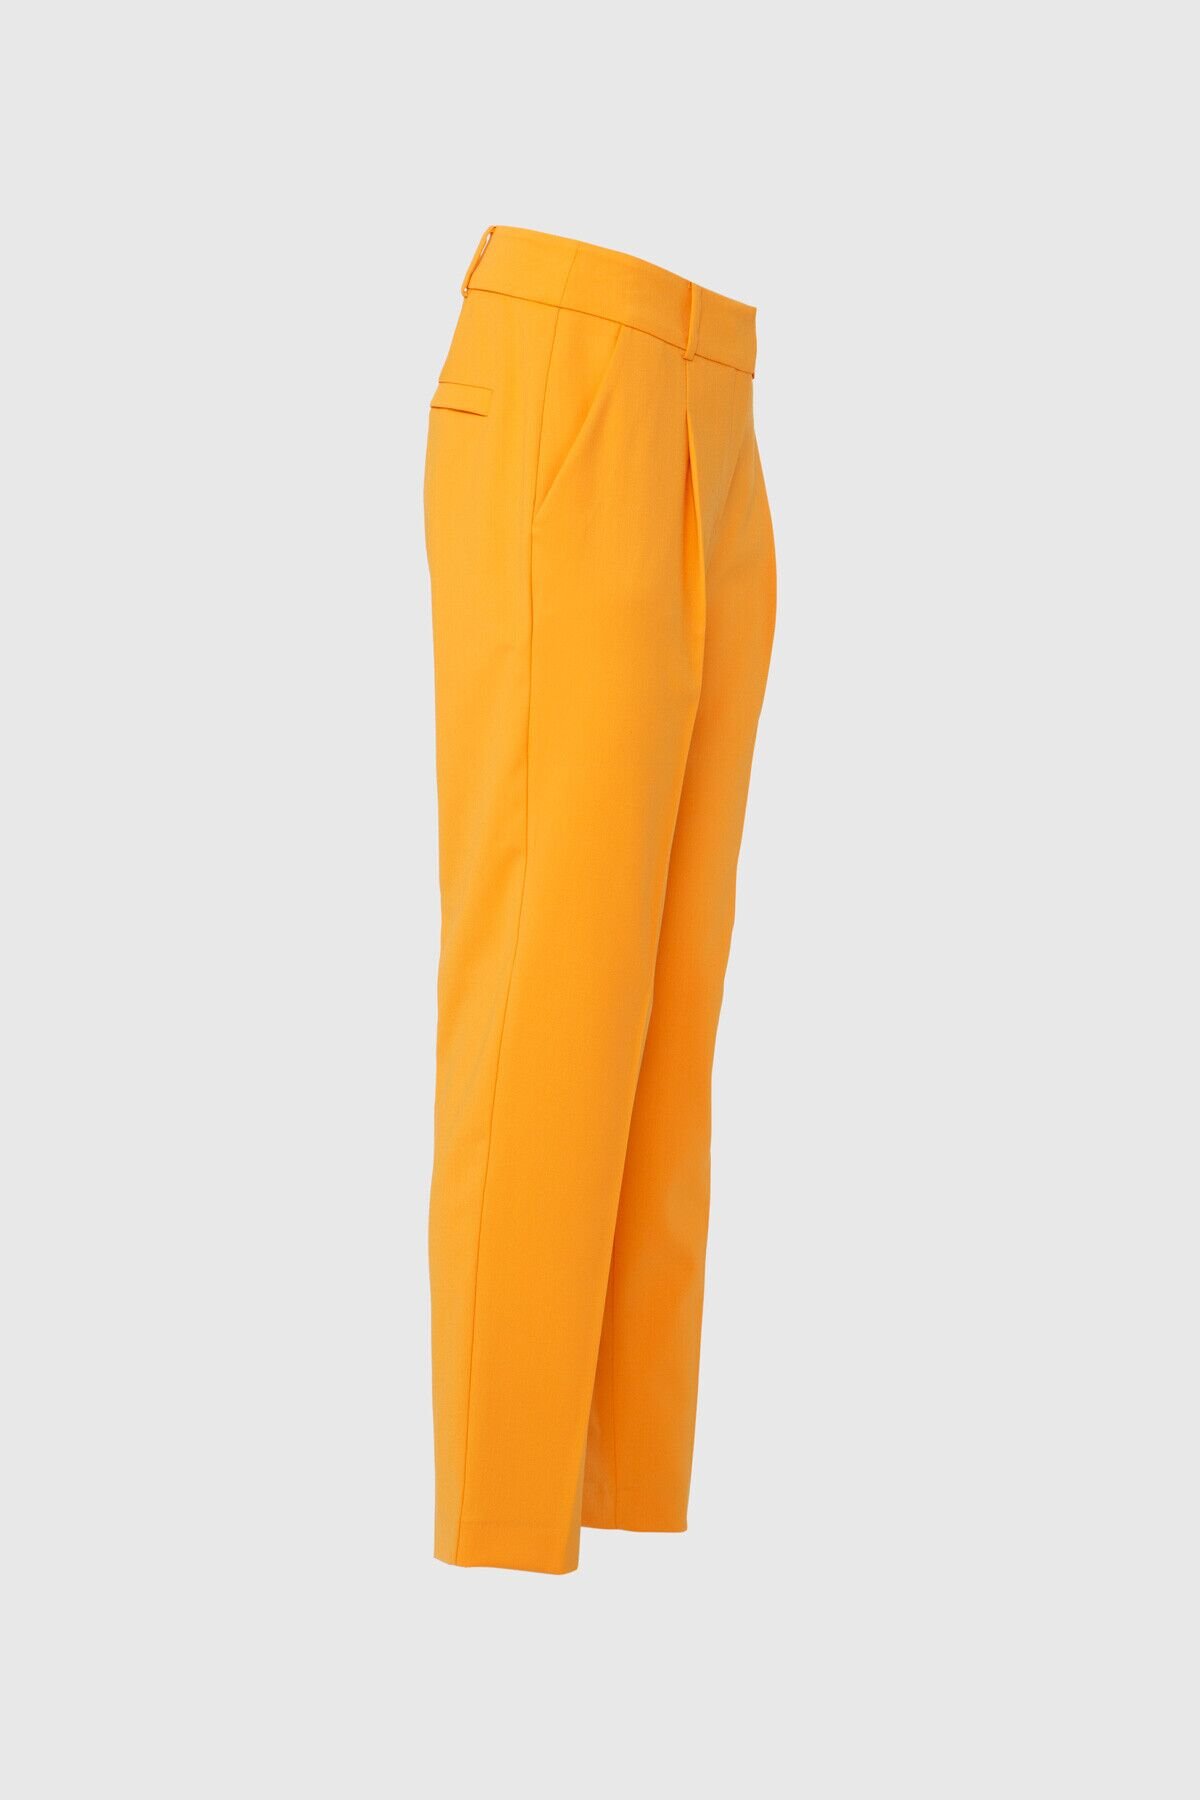 Classic Ankle Length Orange Trousers